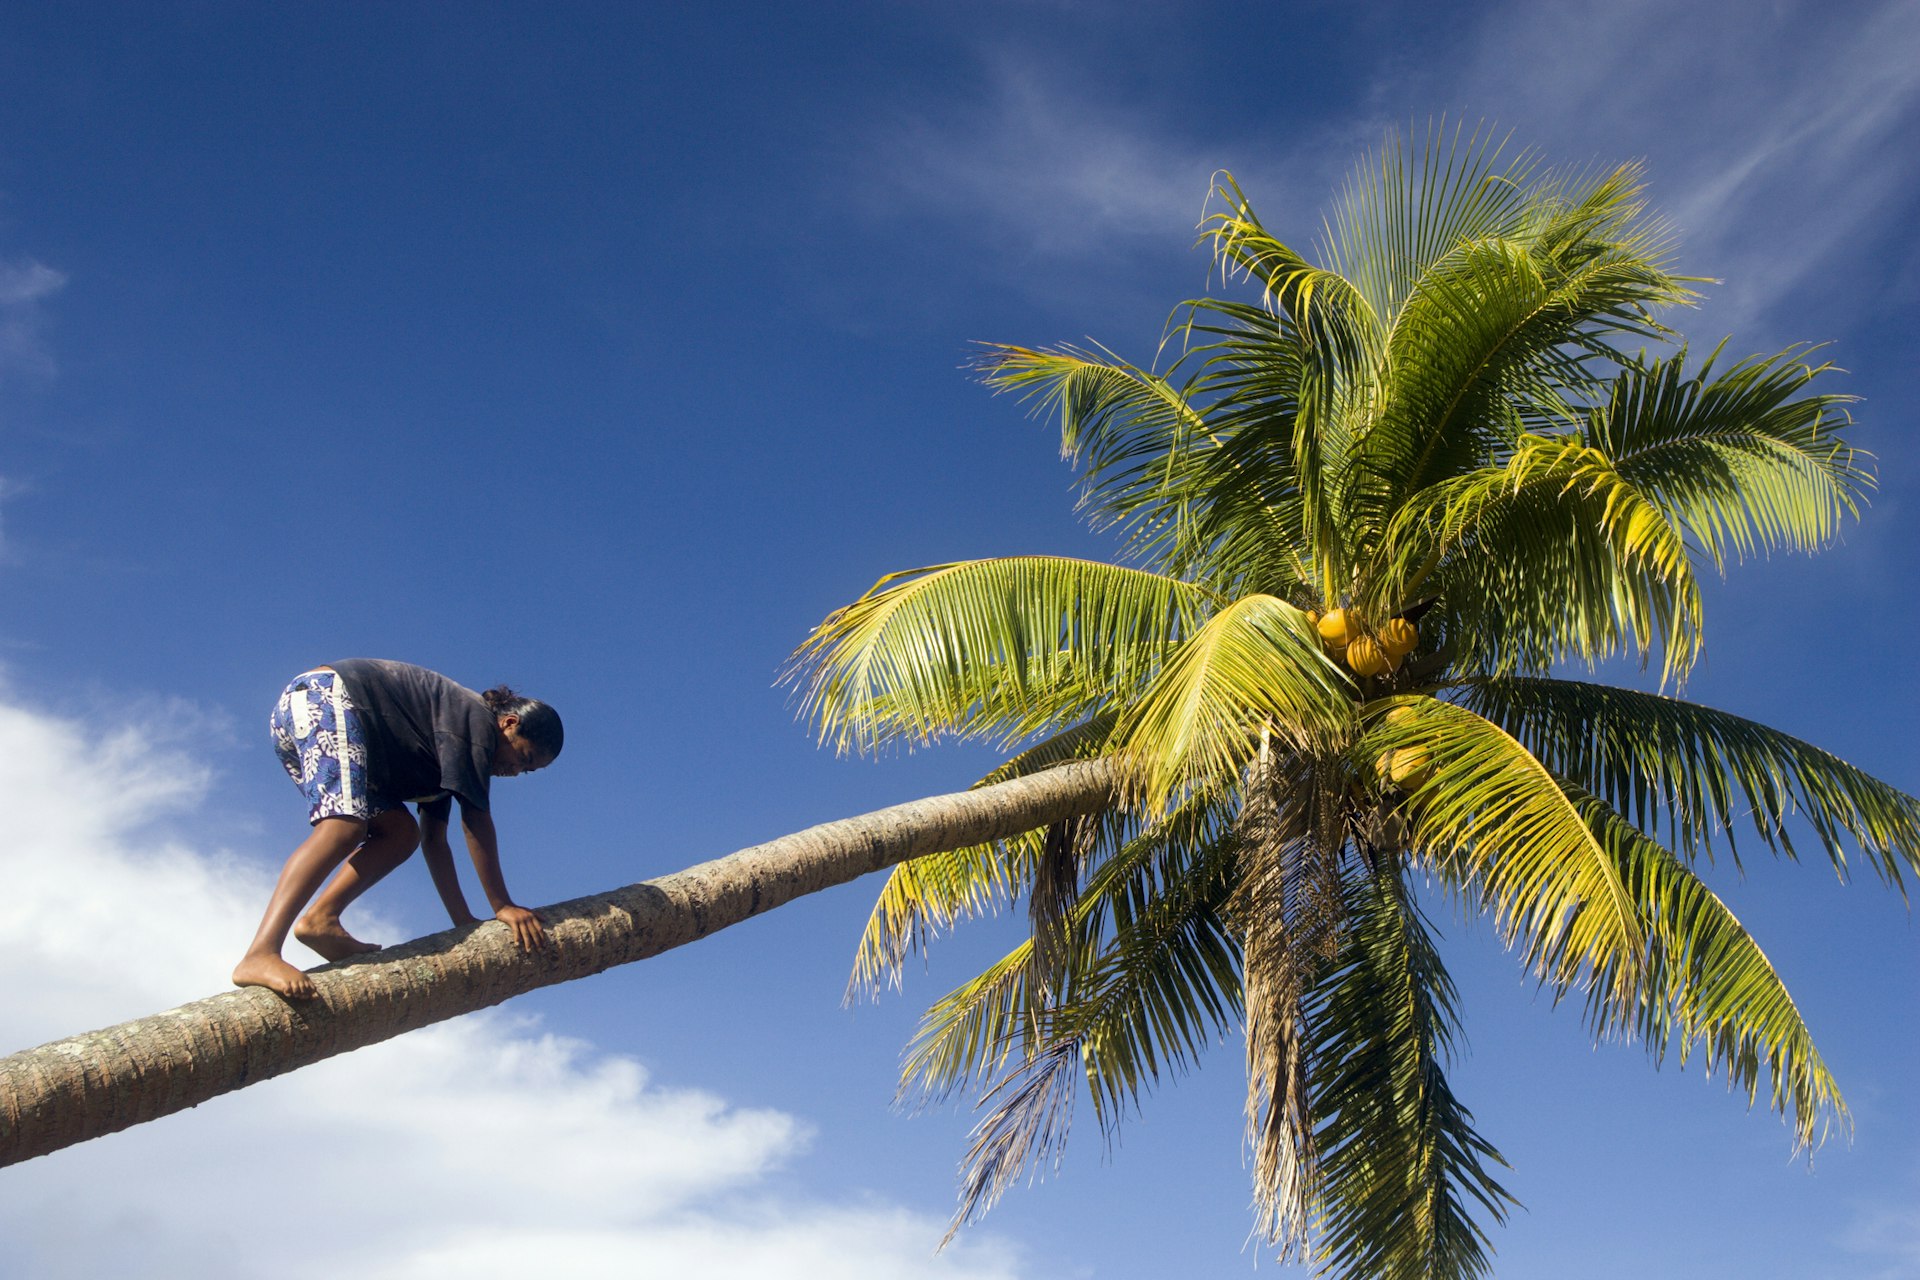 A teenage girl scales a coconut tree barefoot